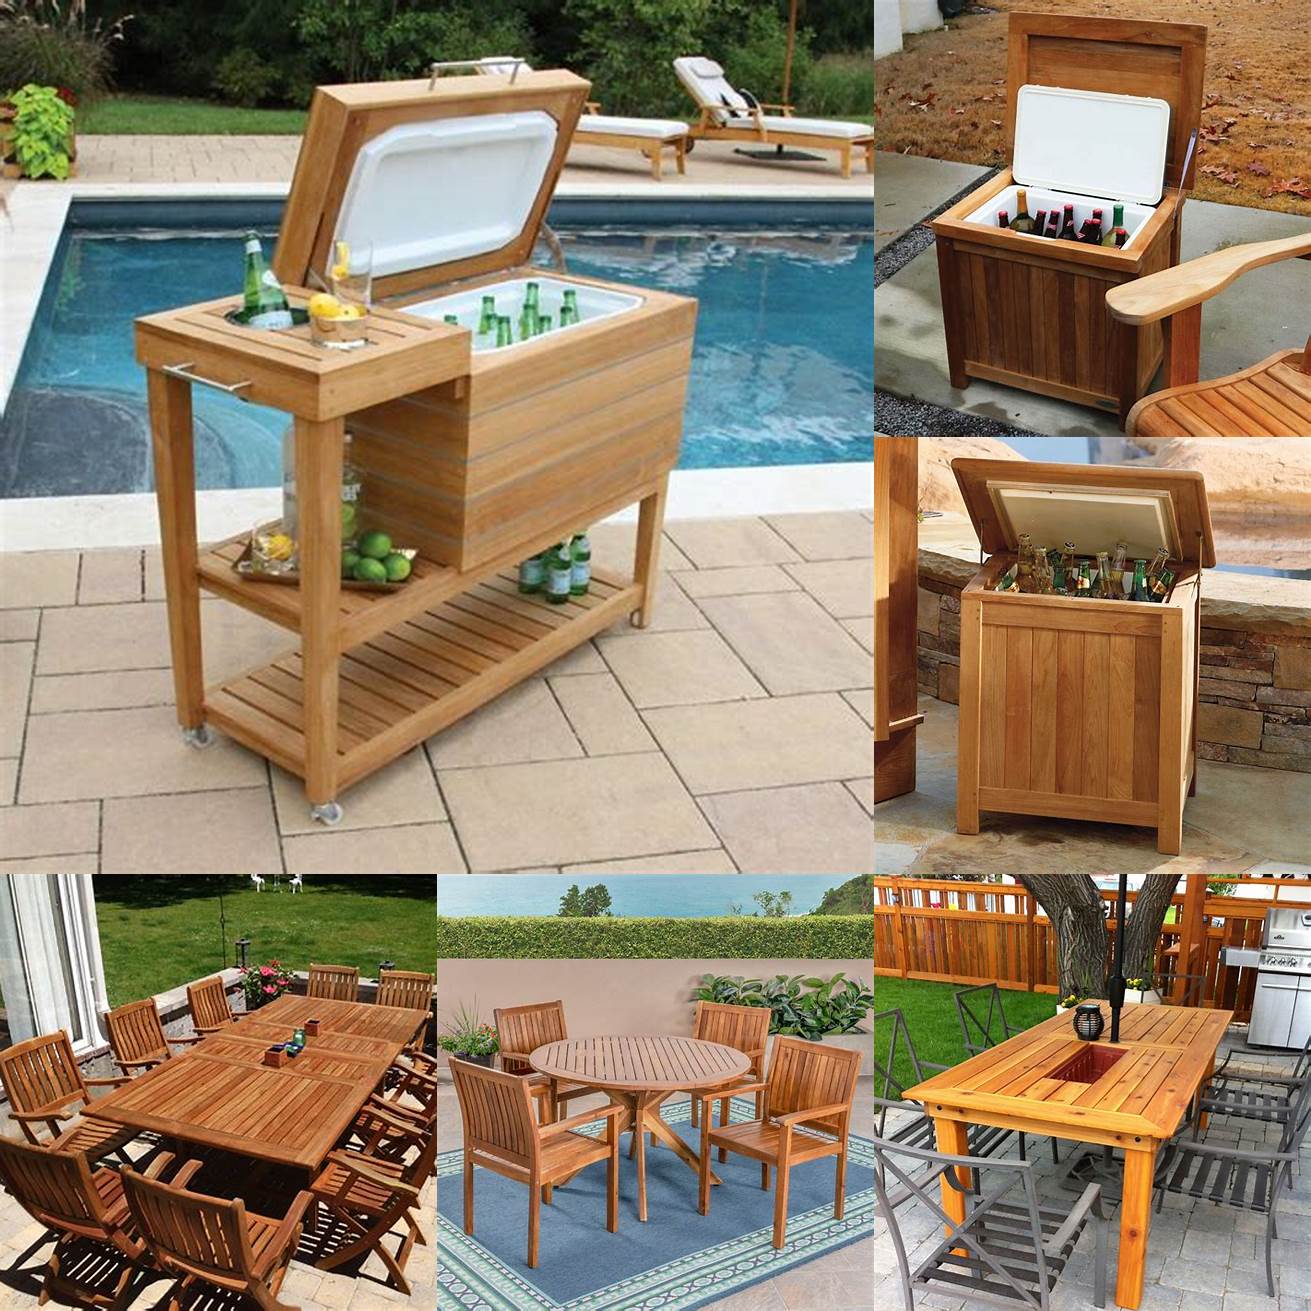 Teak Patio Table with Built-In Cooler